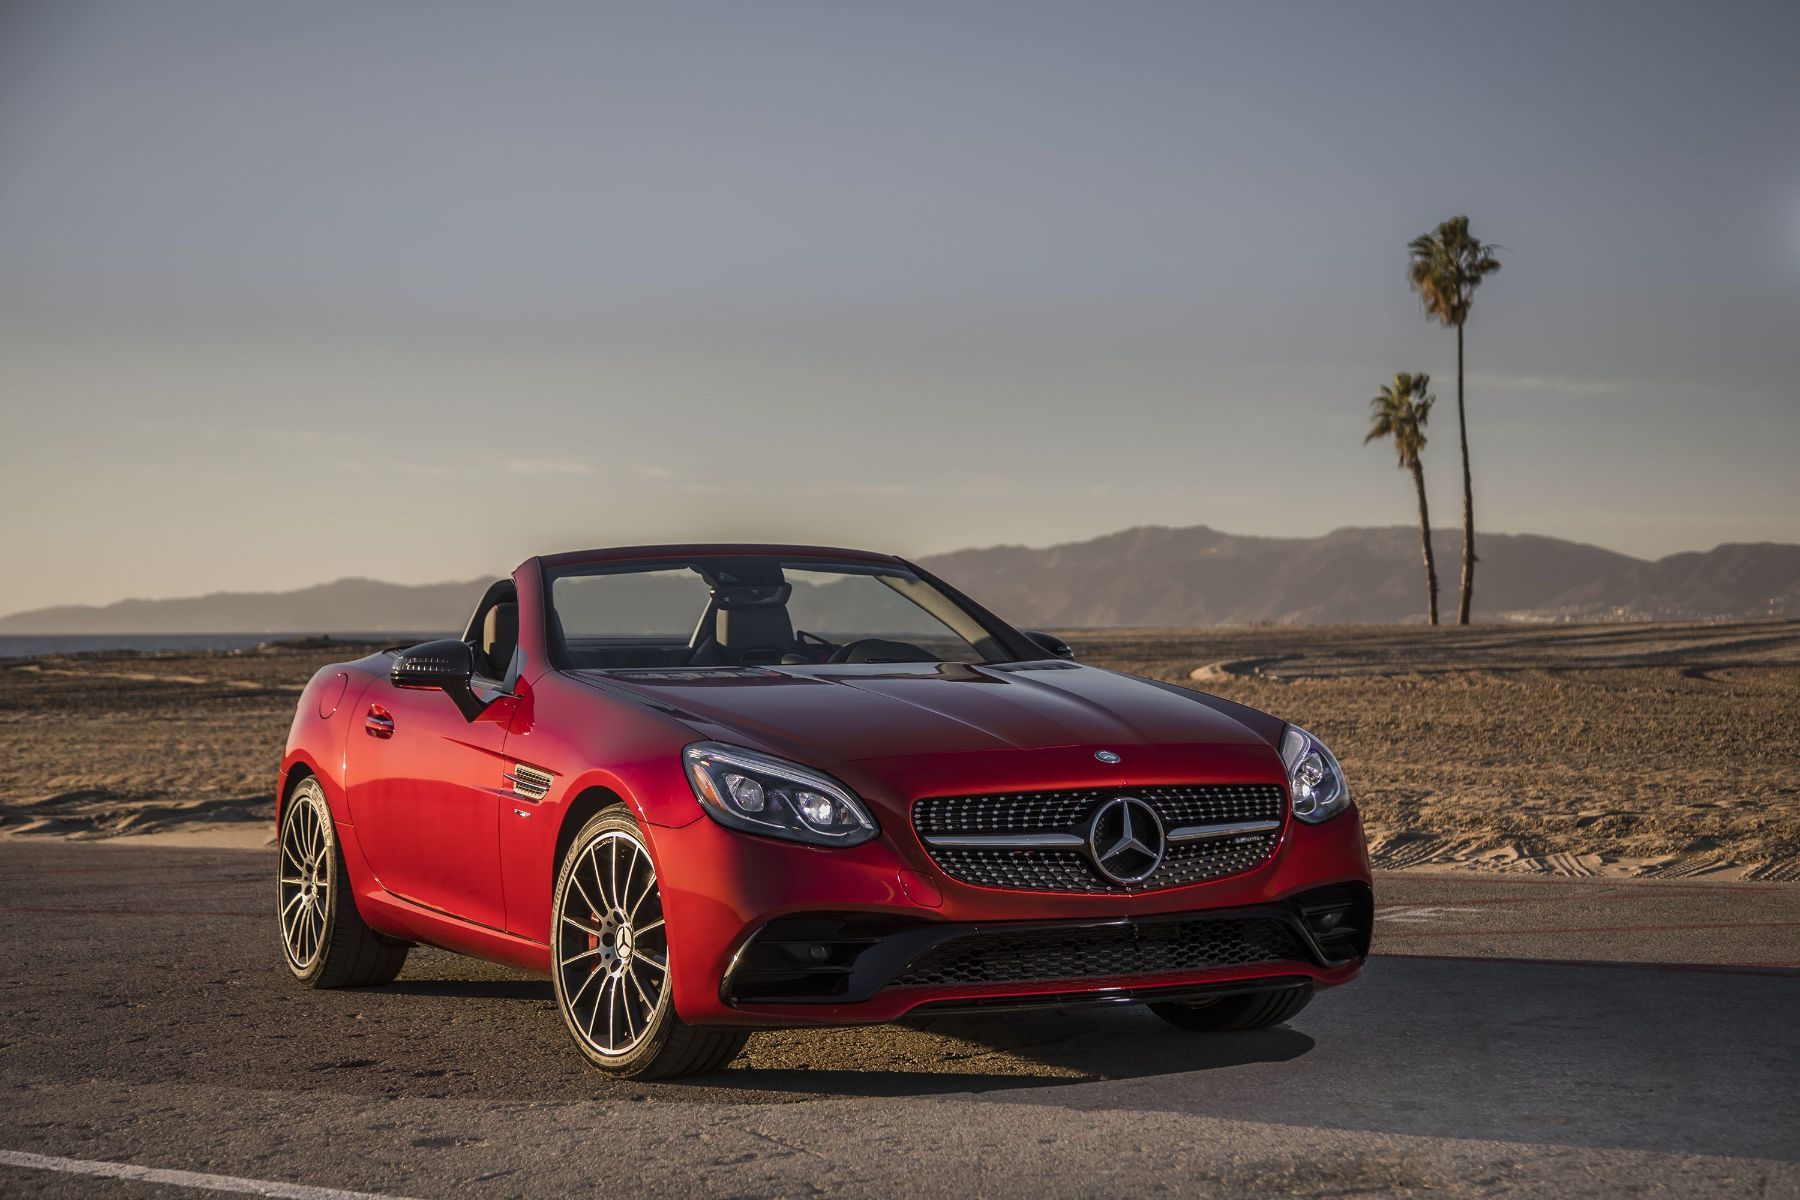 The AMG SLC 43 Roadster is a Car you just want to Drive, no matter where to